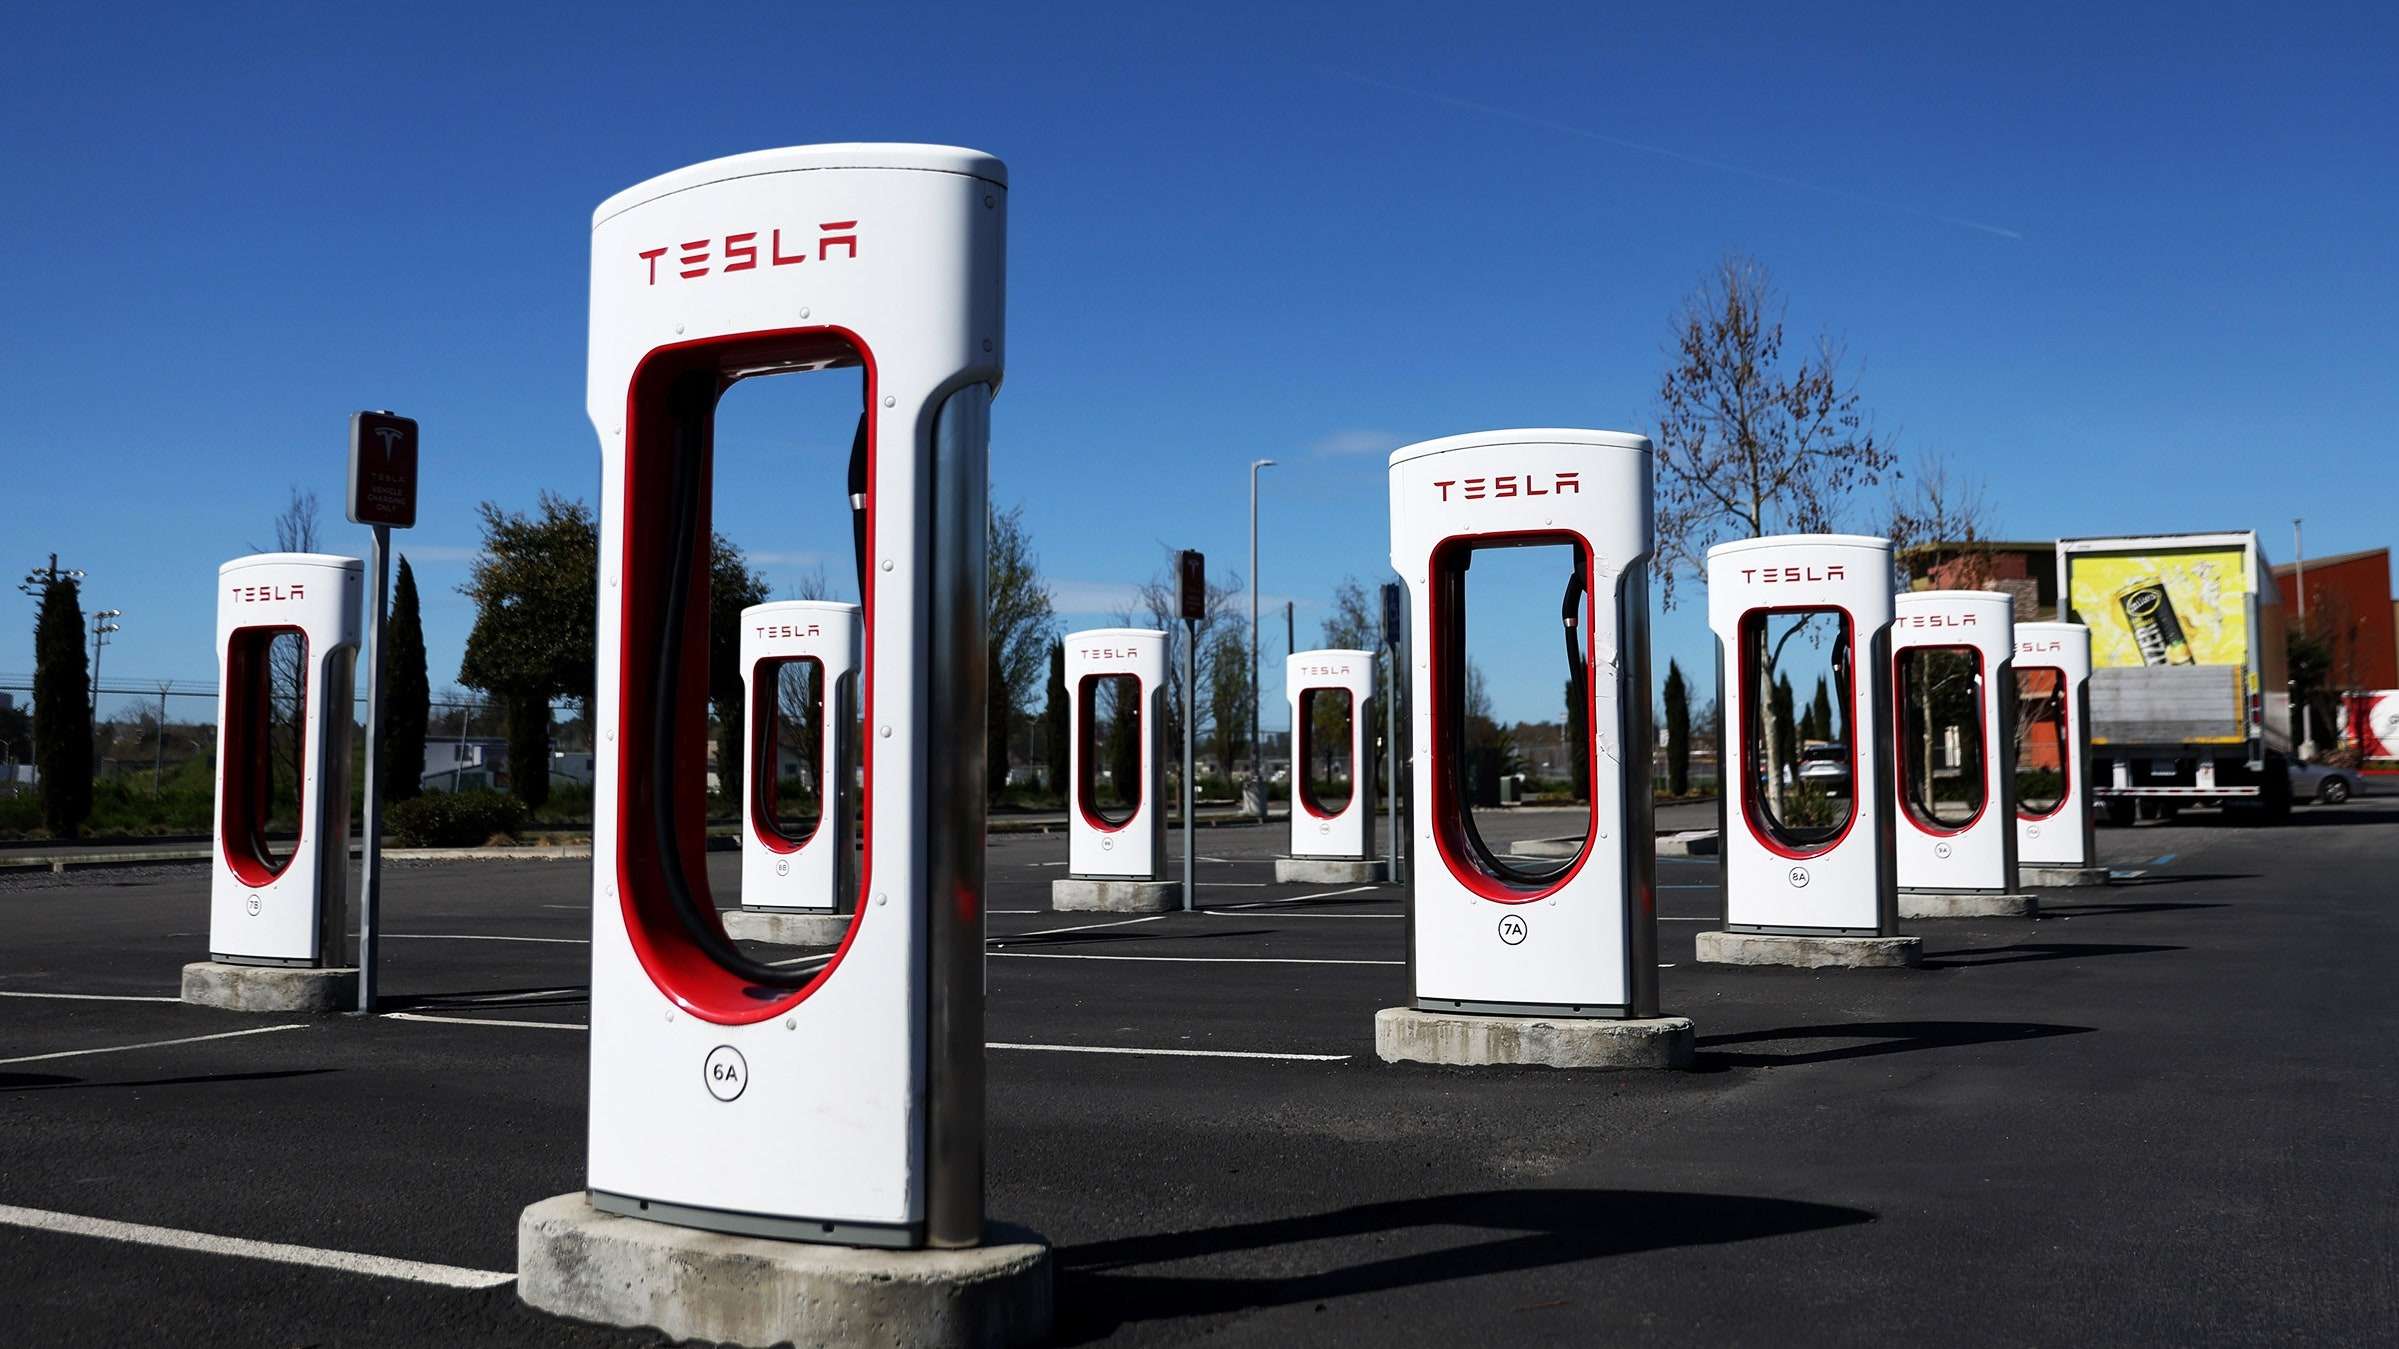 Tesla's V4 Superchargers with High Charging Speeds Are Popping Up All Over the US 